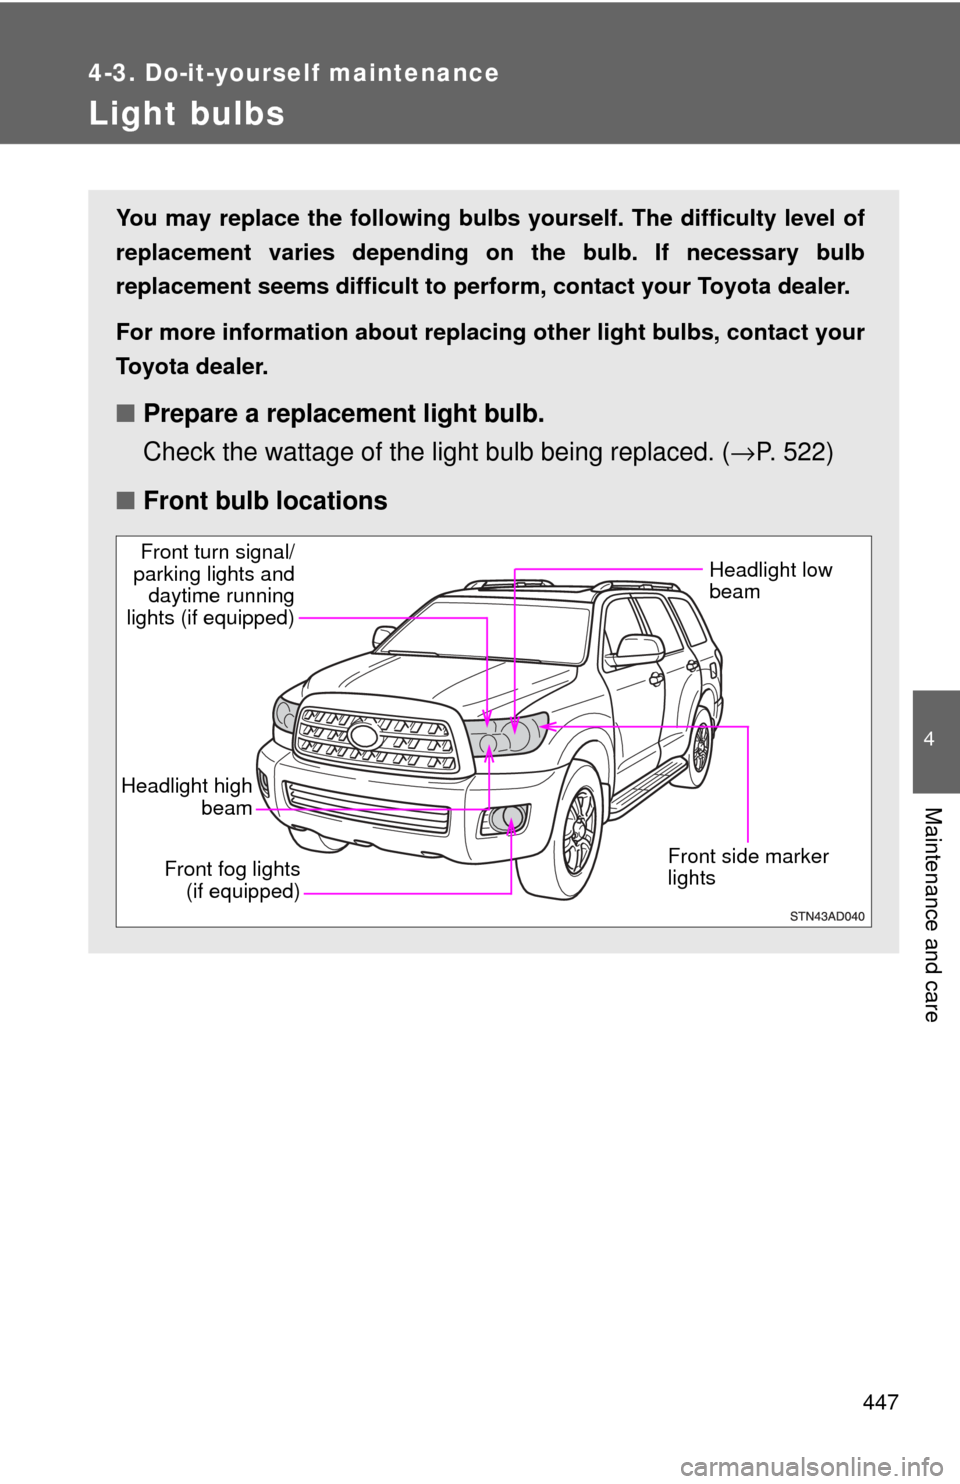 TOYOTA SEQUOIA 2017 2.G Owners Manual 447
4-3. Do-it-yourself maintenance
4
Maintenance and care
Light bulbs
You may replace the following bulbs yourself. The difficulty level of
replacement varies depending on the bulb. If necessary bulb